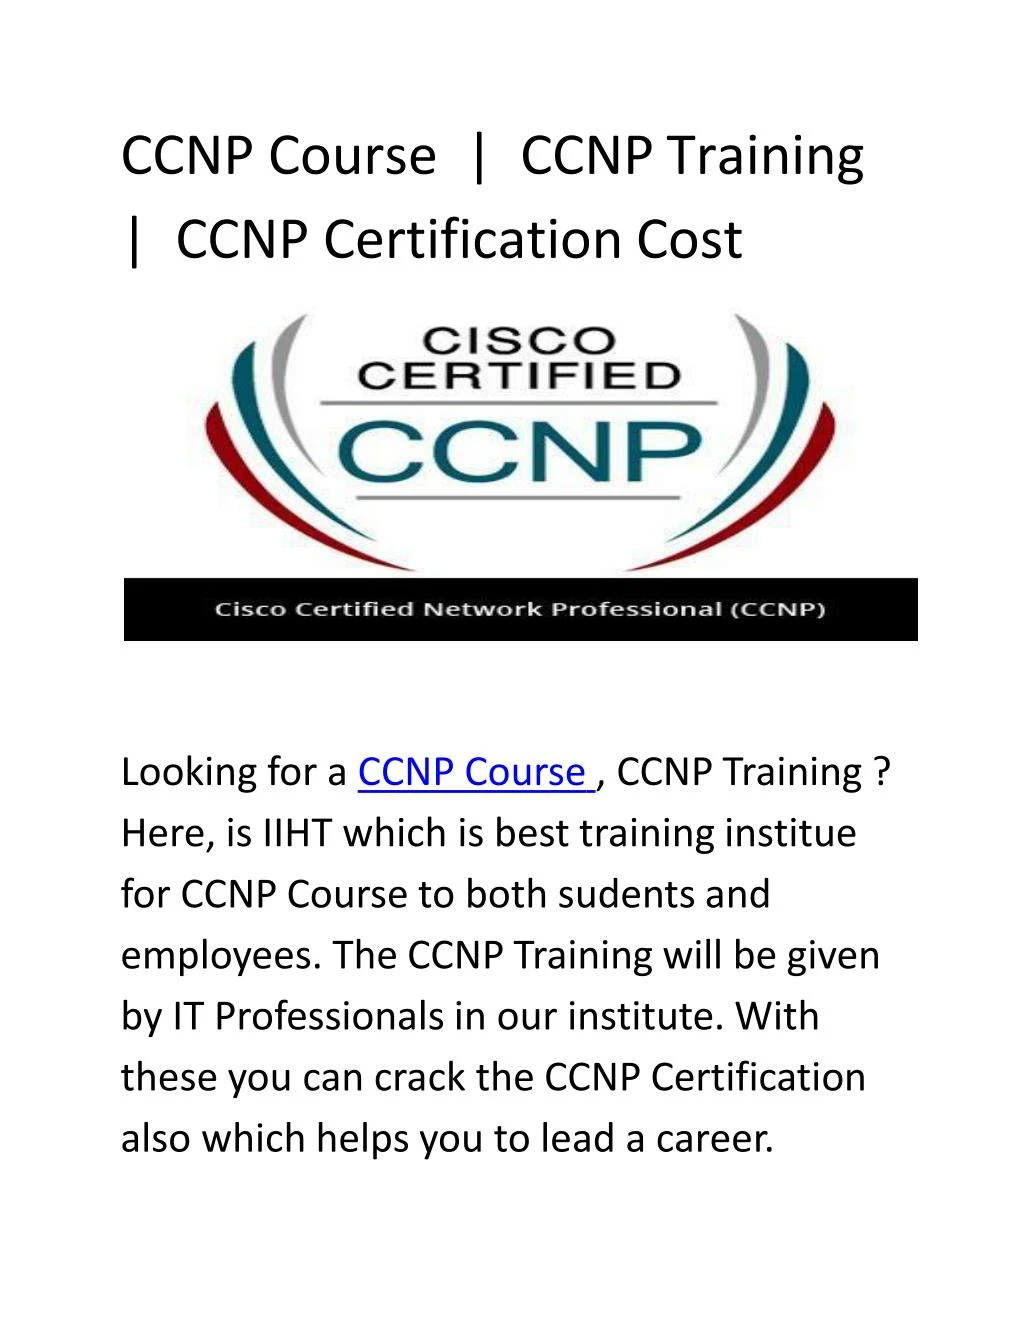 ccnp course ccnp training ccnp certification cost